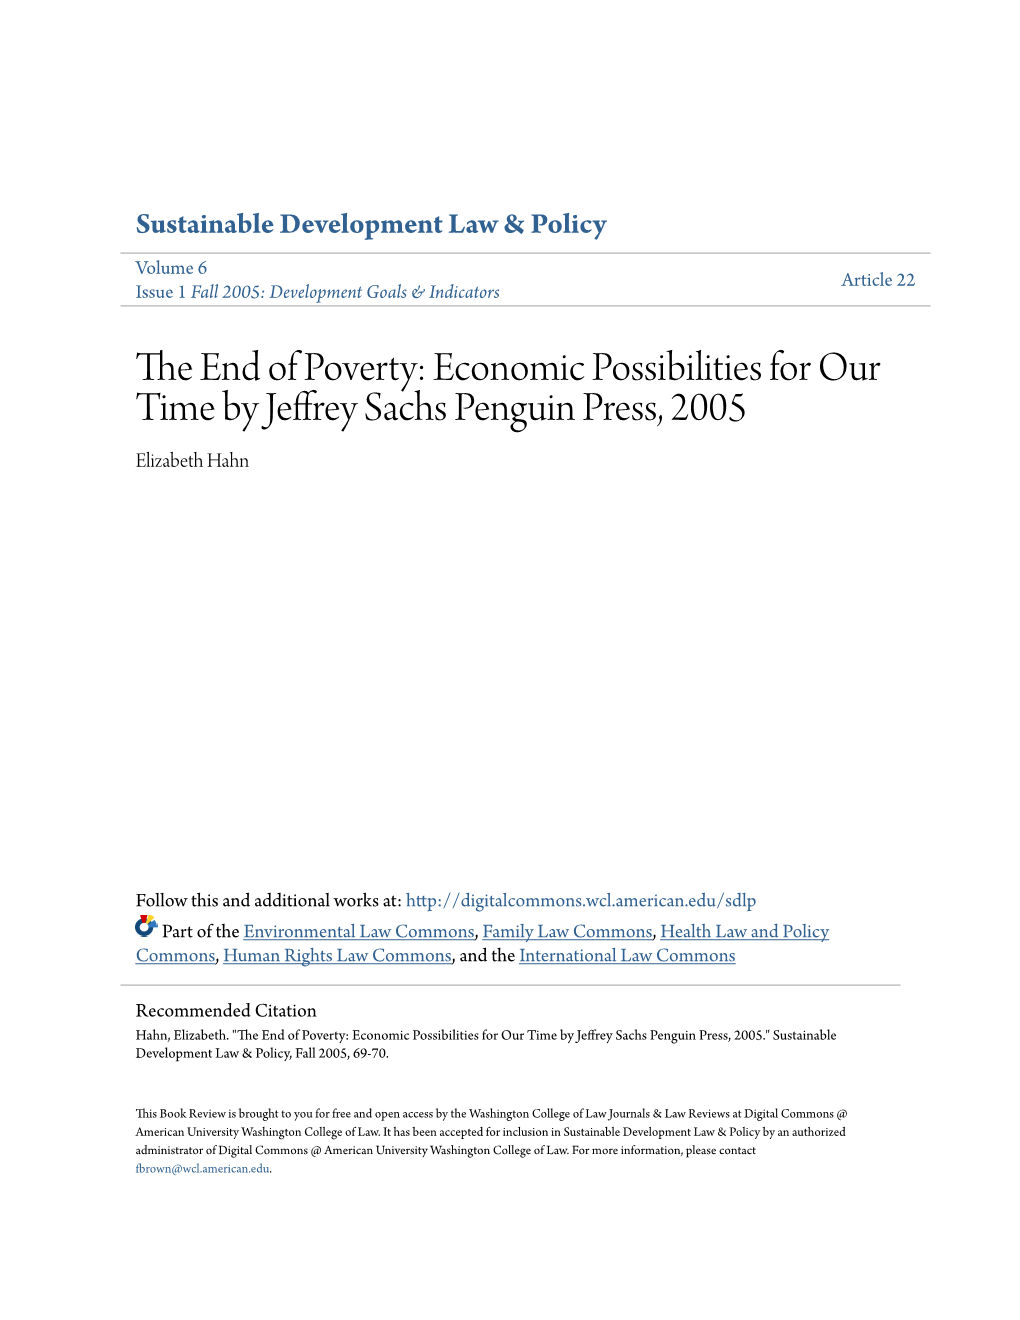 THE END of POVERTY: ECONOMIC POSSIBILITIES for OUR TIME by Jeffrey Sachs Penguin Press, 2005 Reviewed by Elizabeth Hahn*